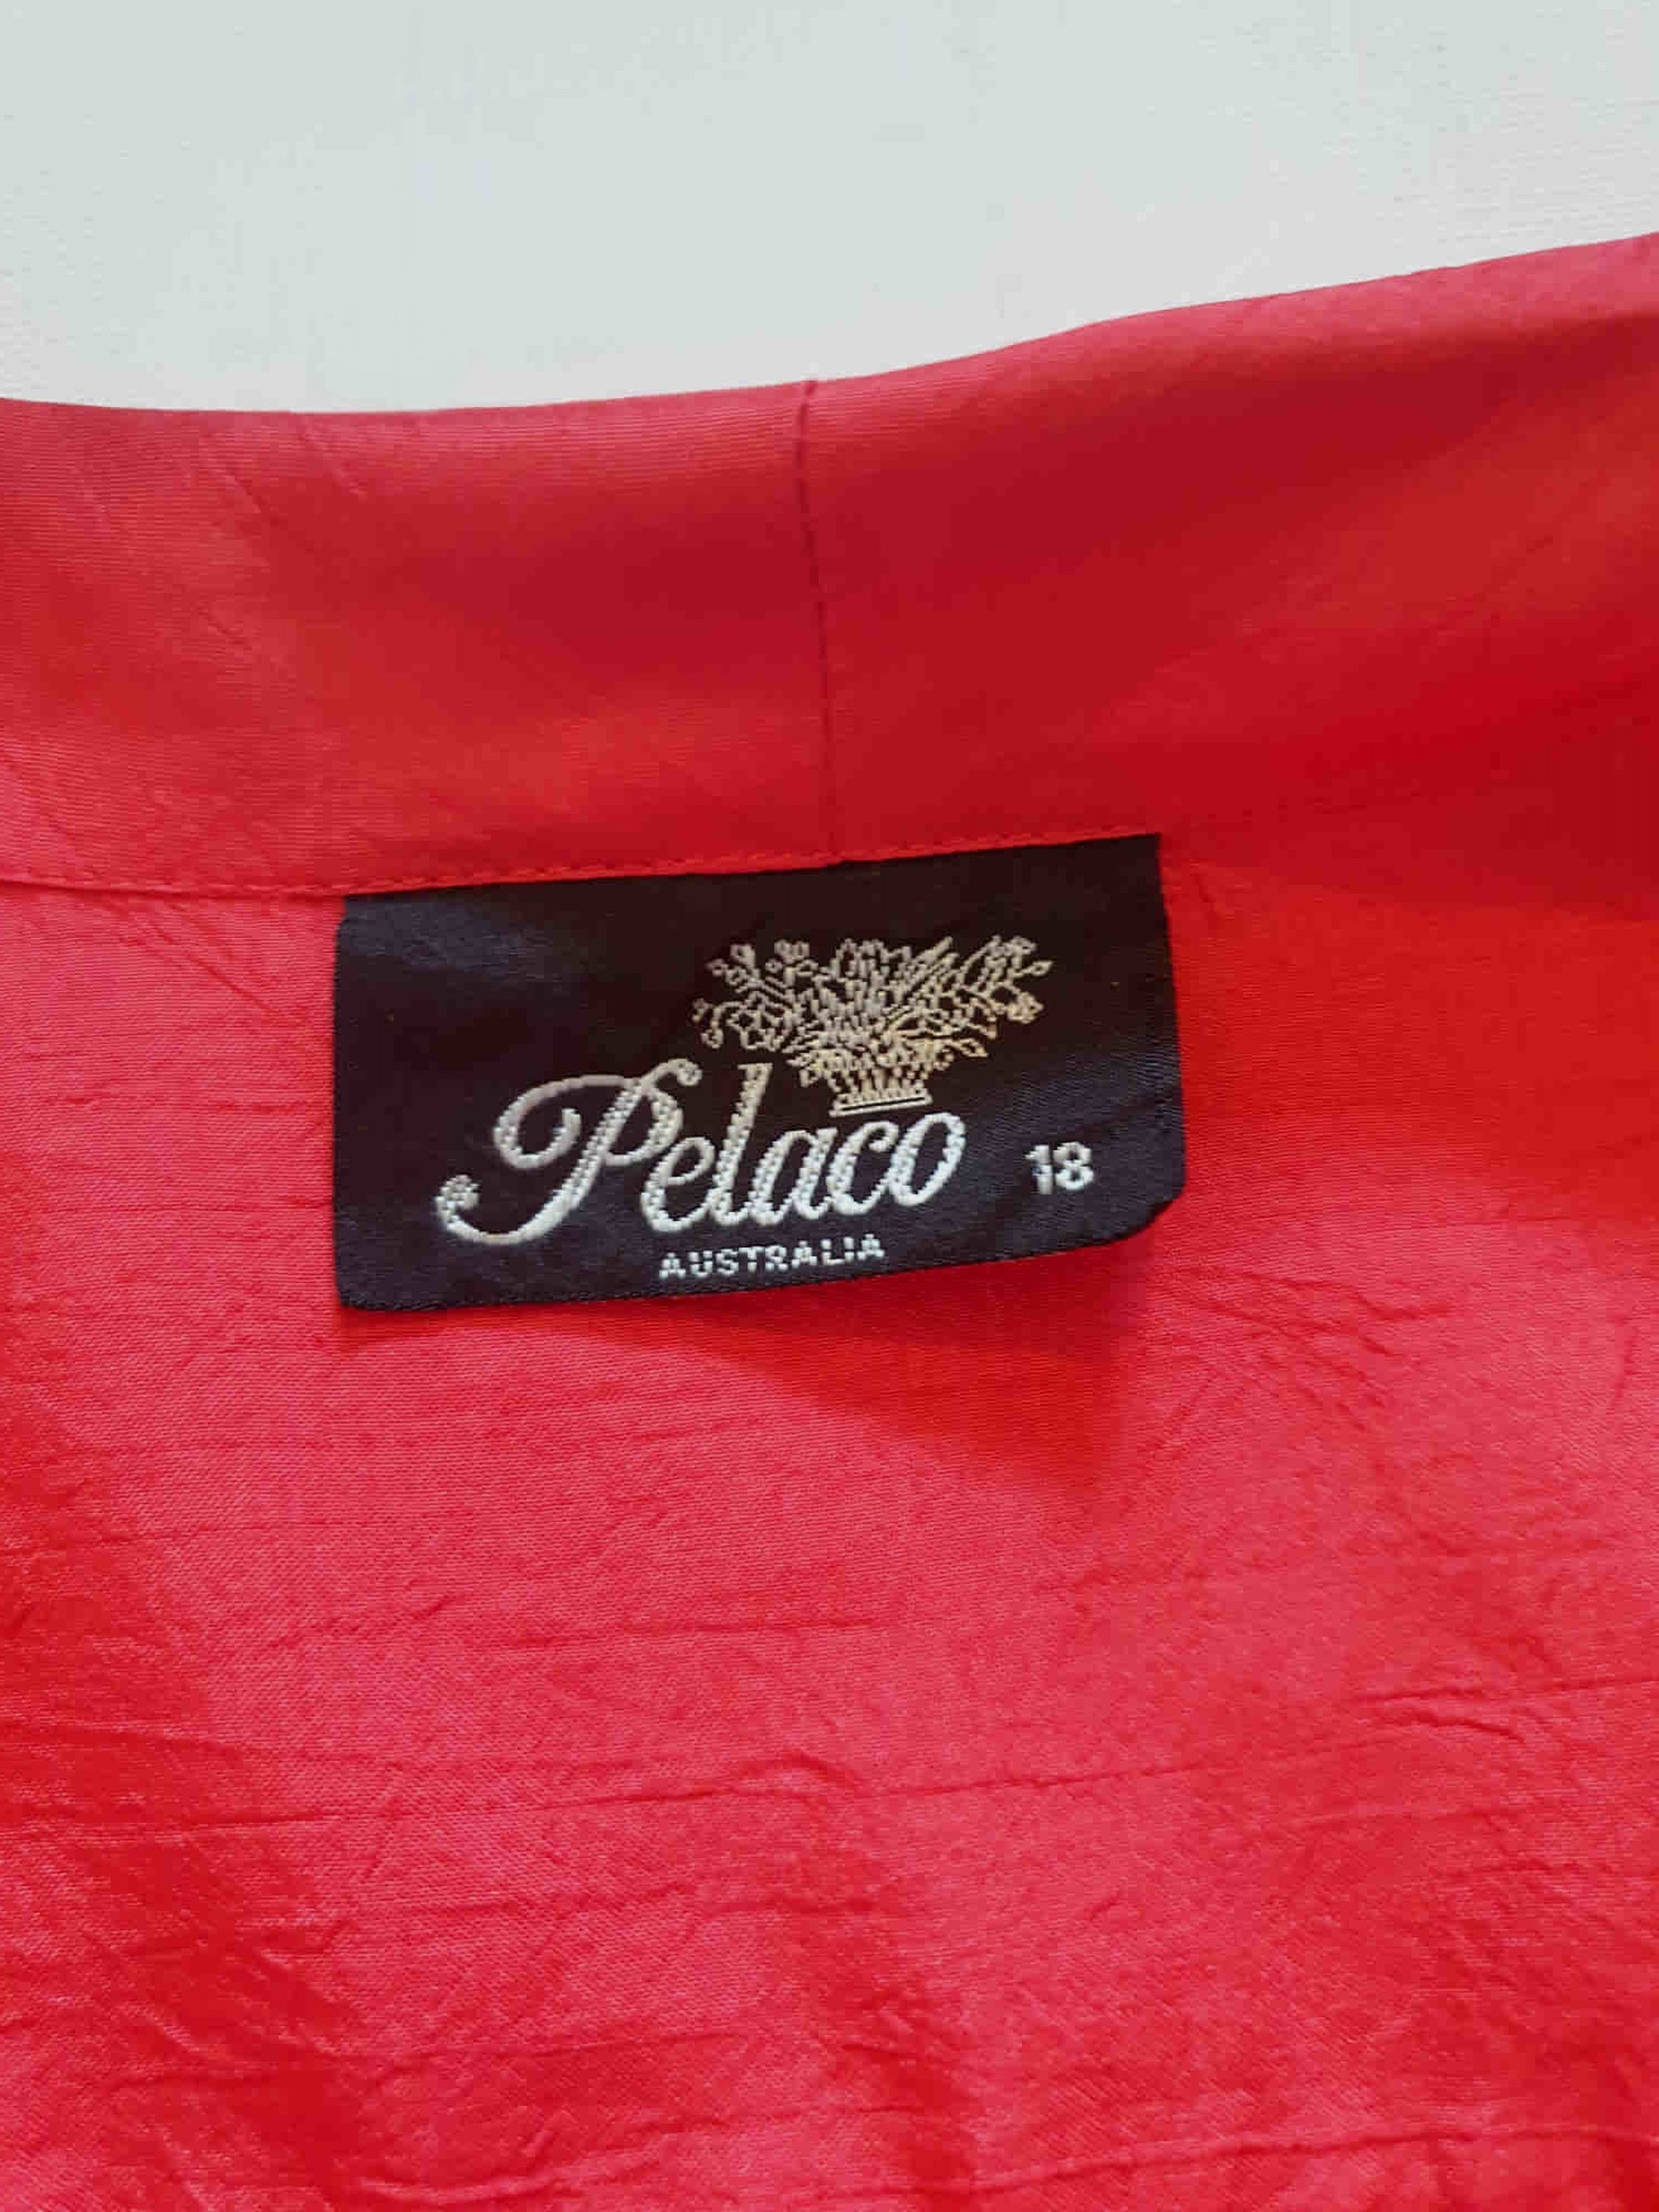 1980s vintage shiny red pussy bow blouse by pelaco large